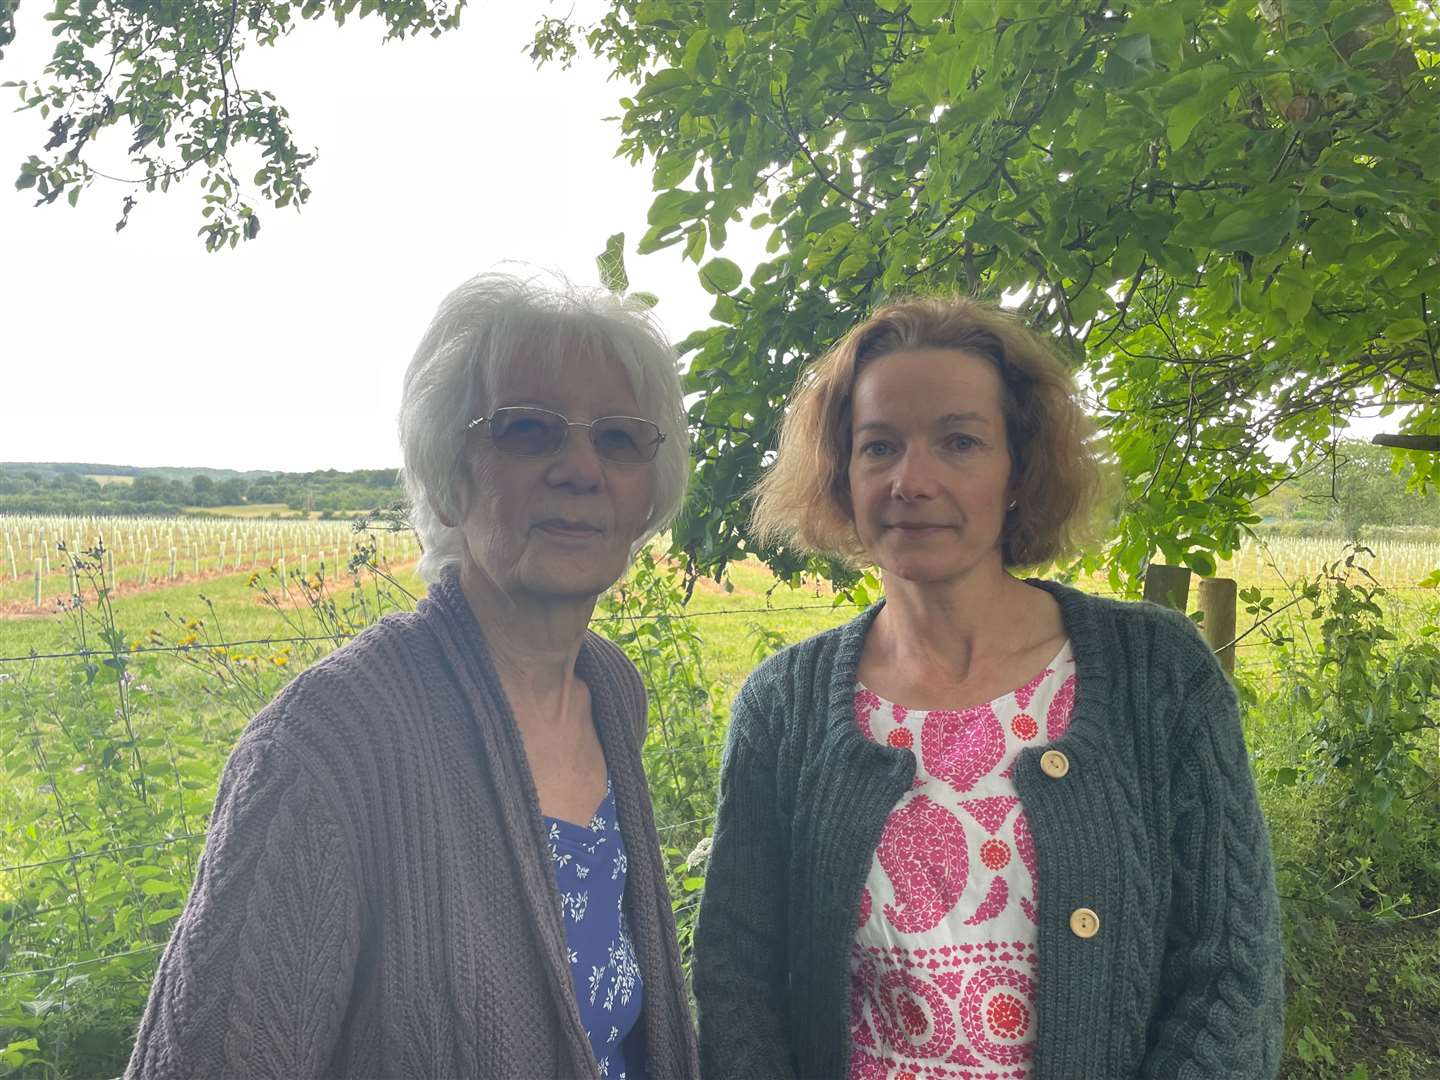 From left: Elizabeth Rons with her daughter Emma Rons claim the winery will be too tall